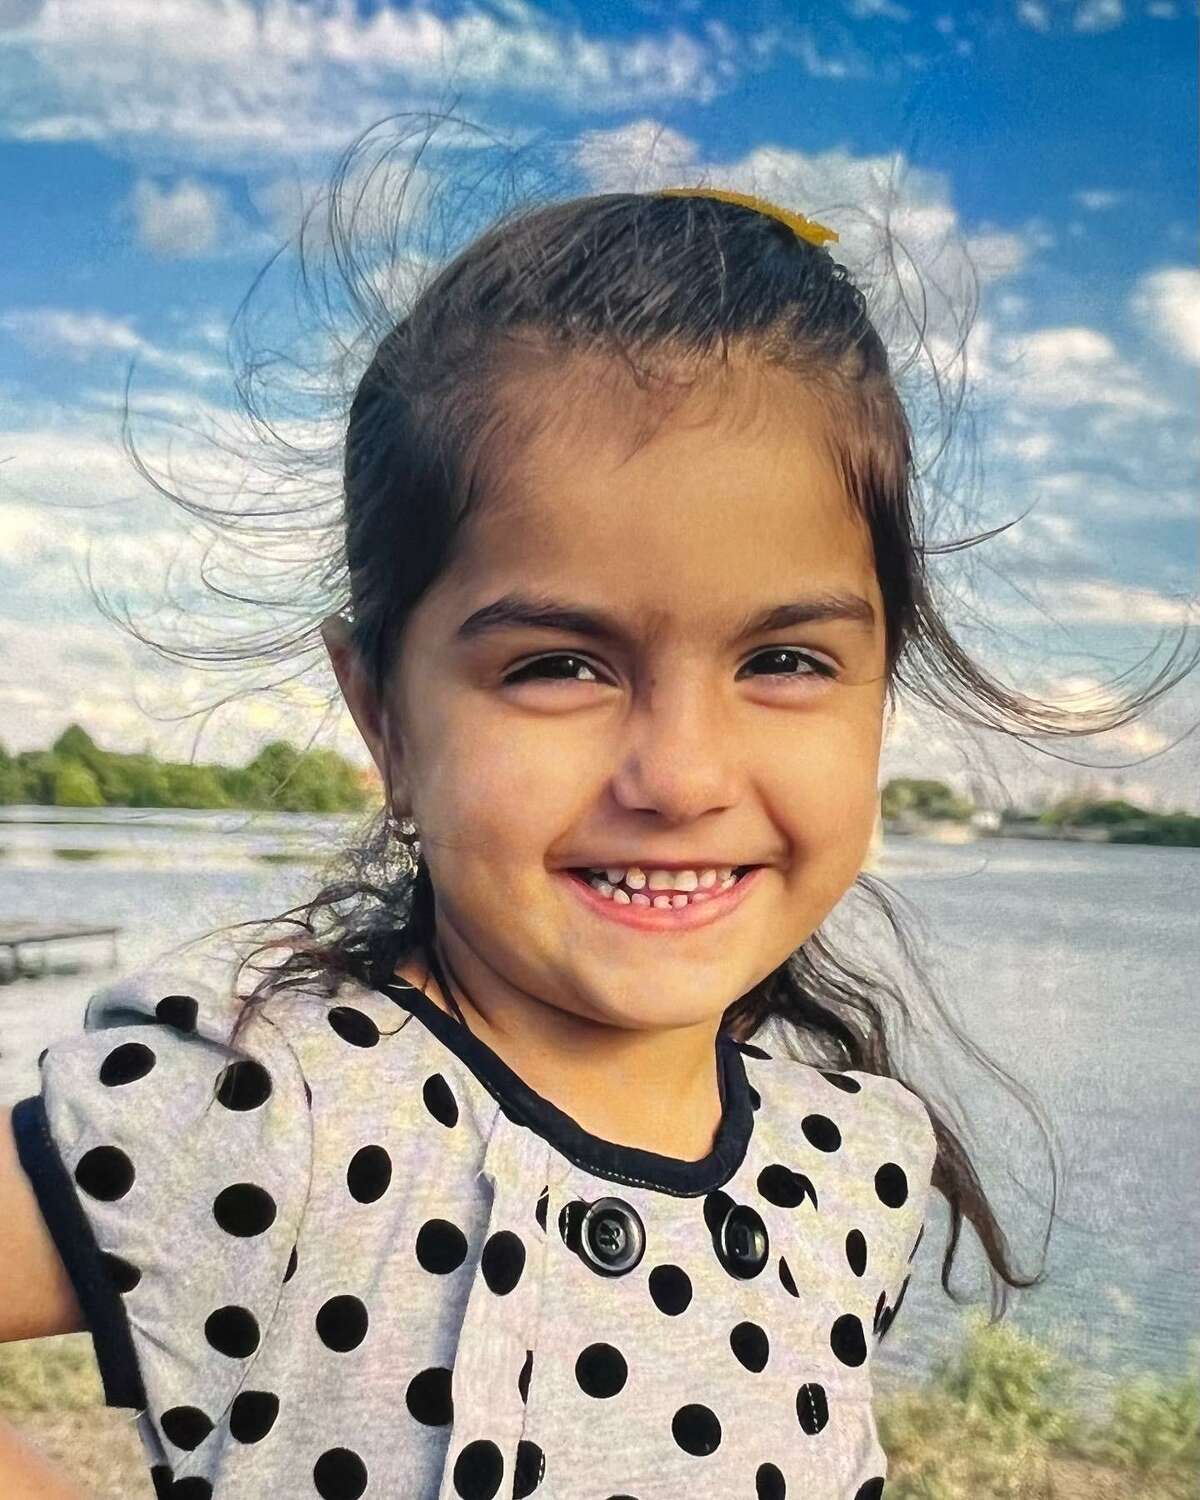 Lina Sardar Khil, 3 years old, has been missing since Monday night. Police have been focusing their search in the apartment complex where her family lives.